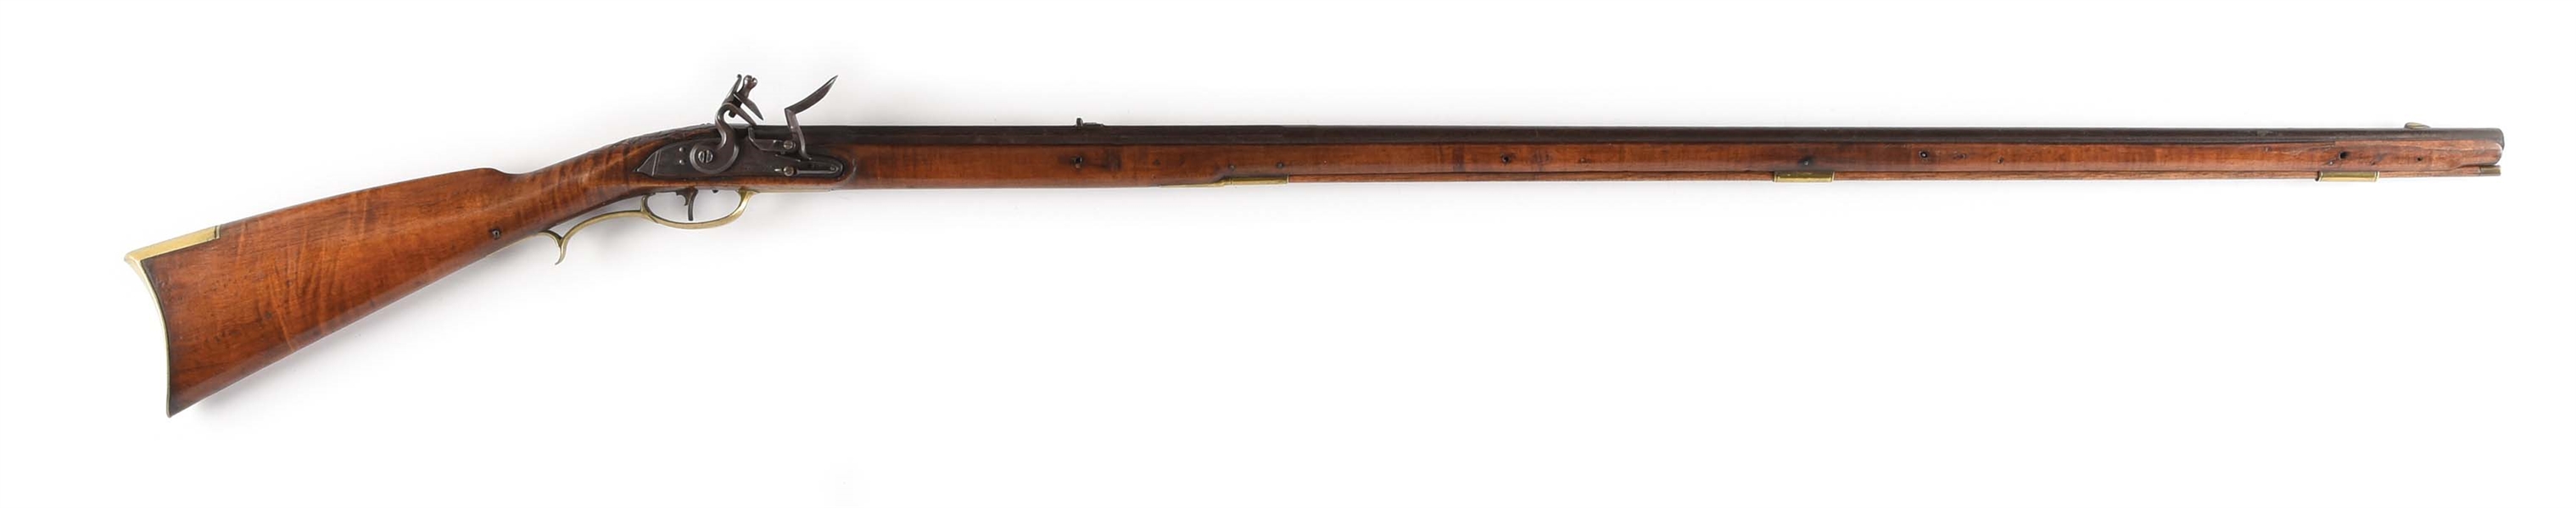 (A) FLINTLOCK KENTUCKY BUCK AND BALL RIFLE ATTRIBUTED TO FREDERICK SELL.